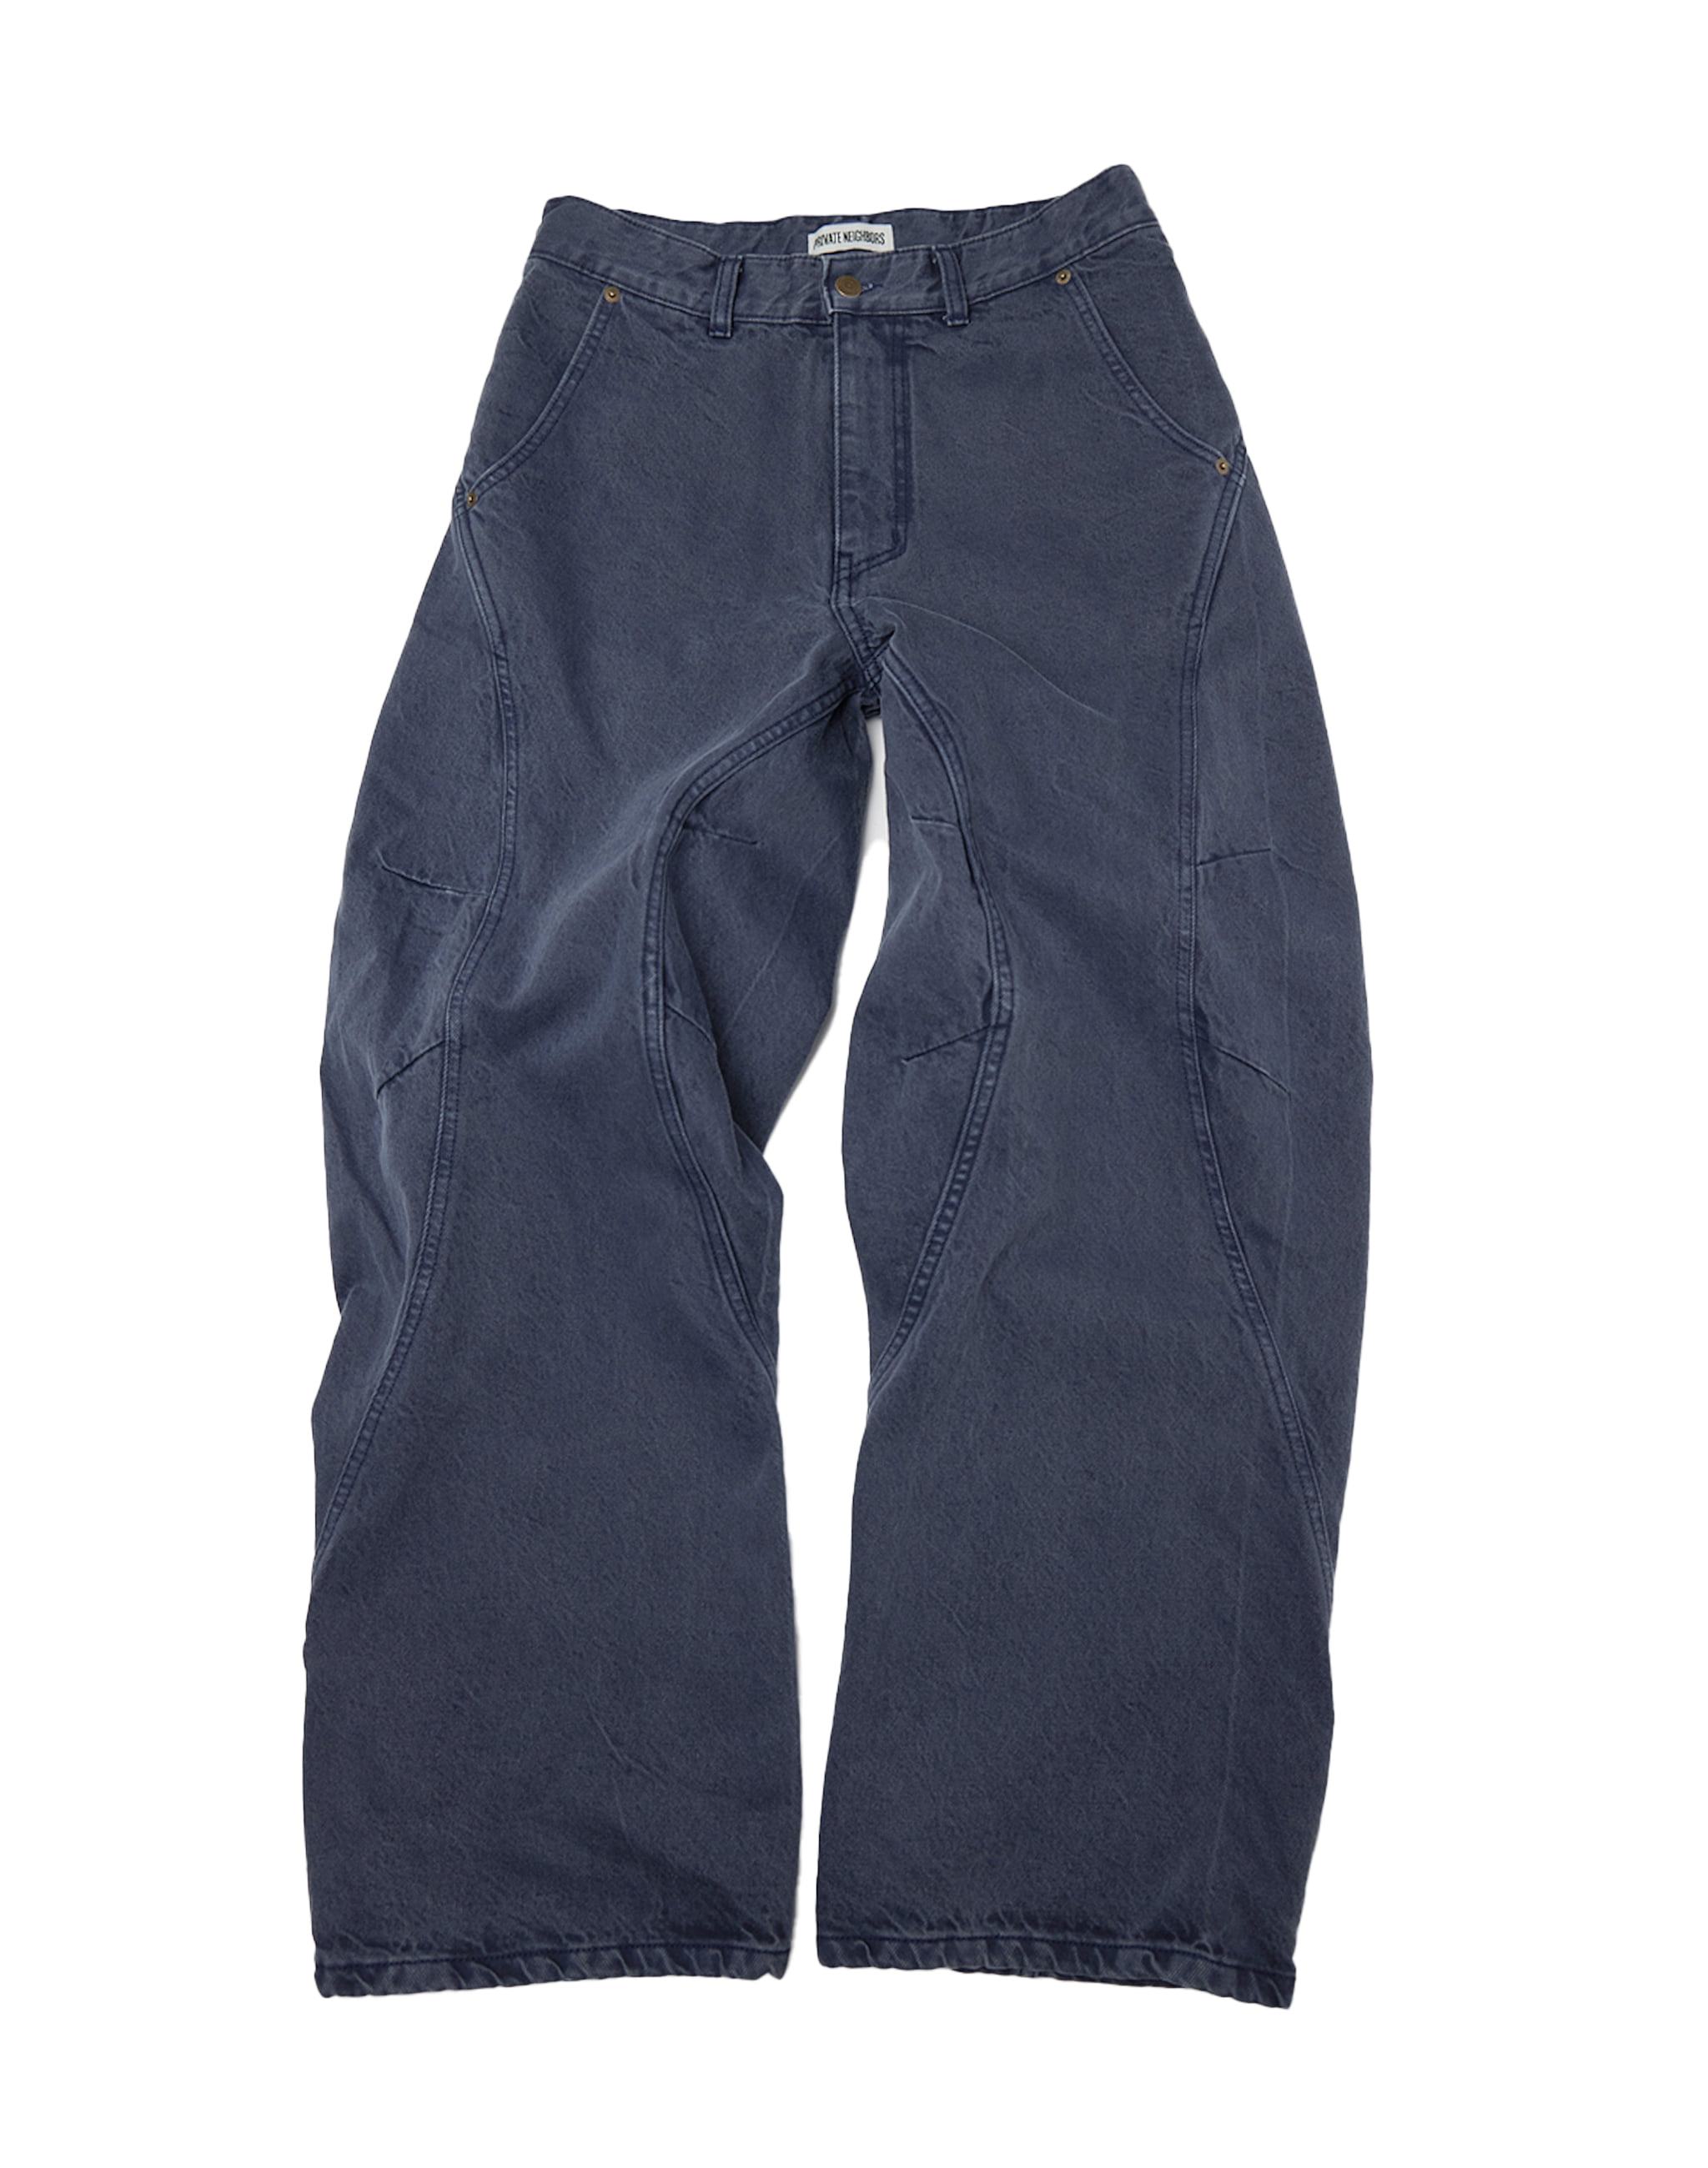 Engineered Jeans(Garment Dyed)-Navy